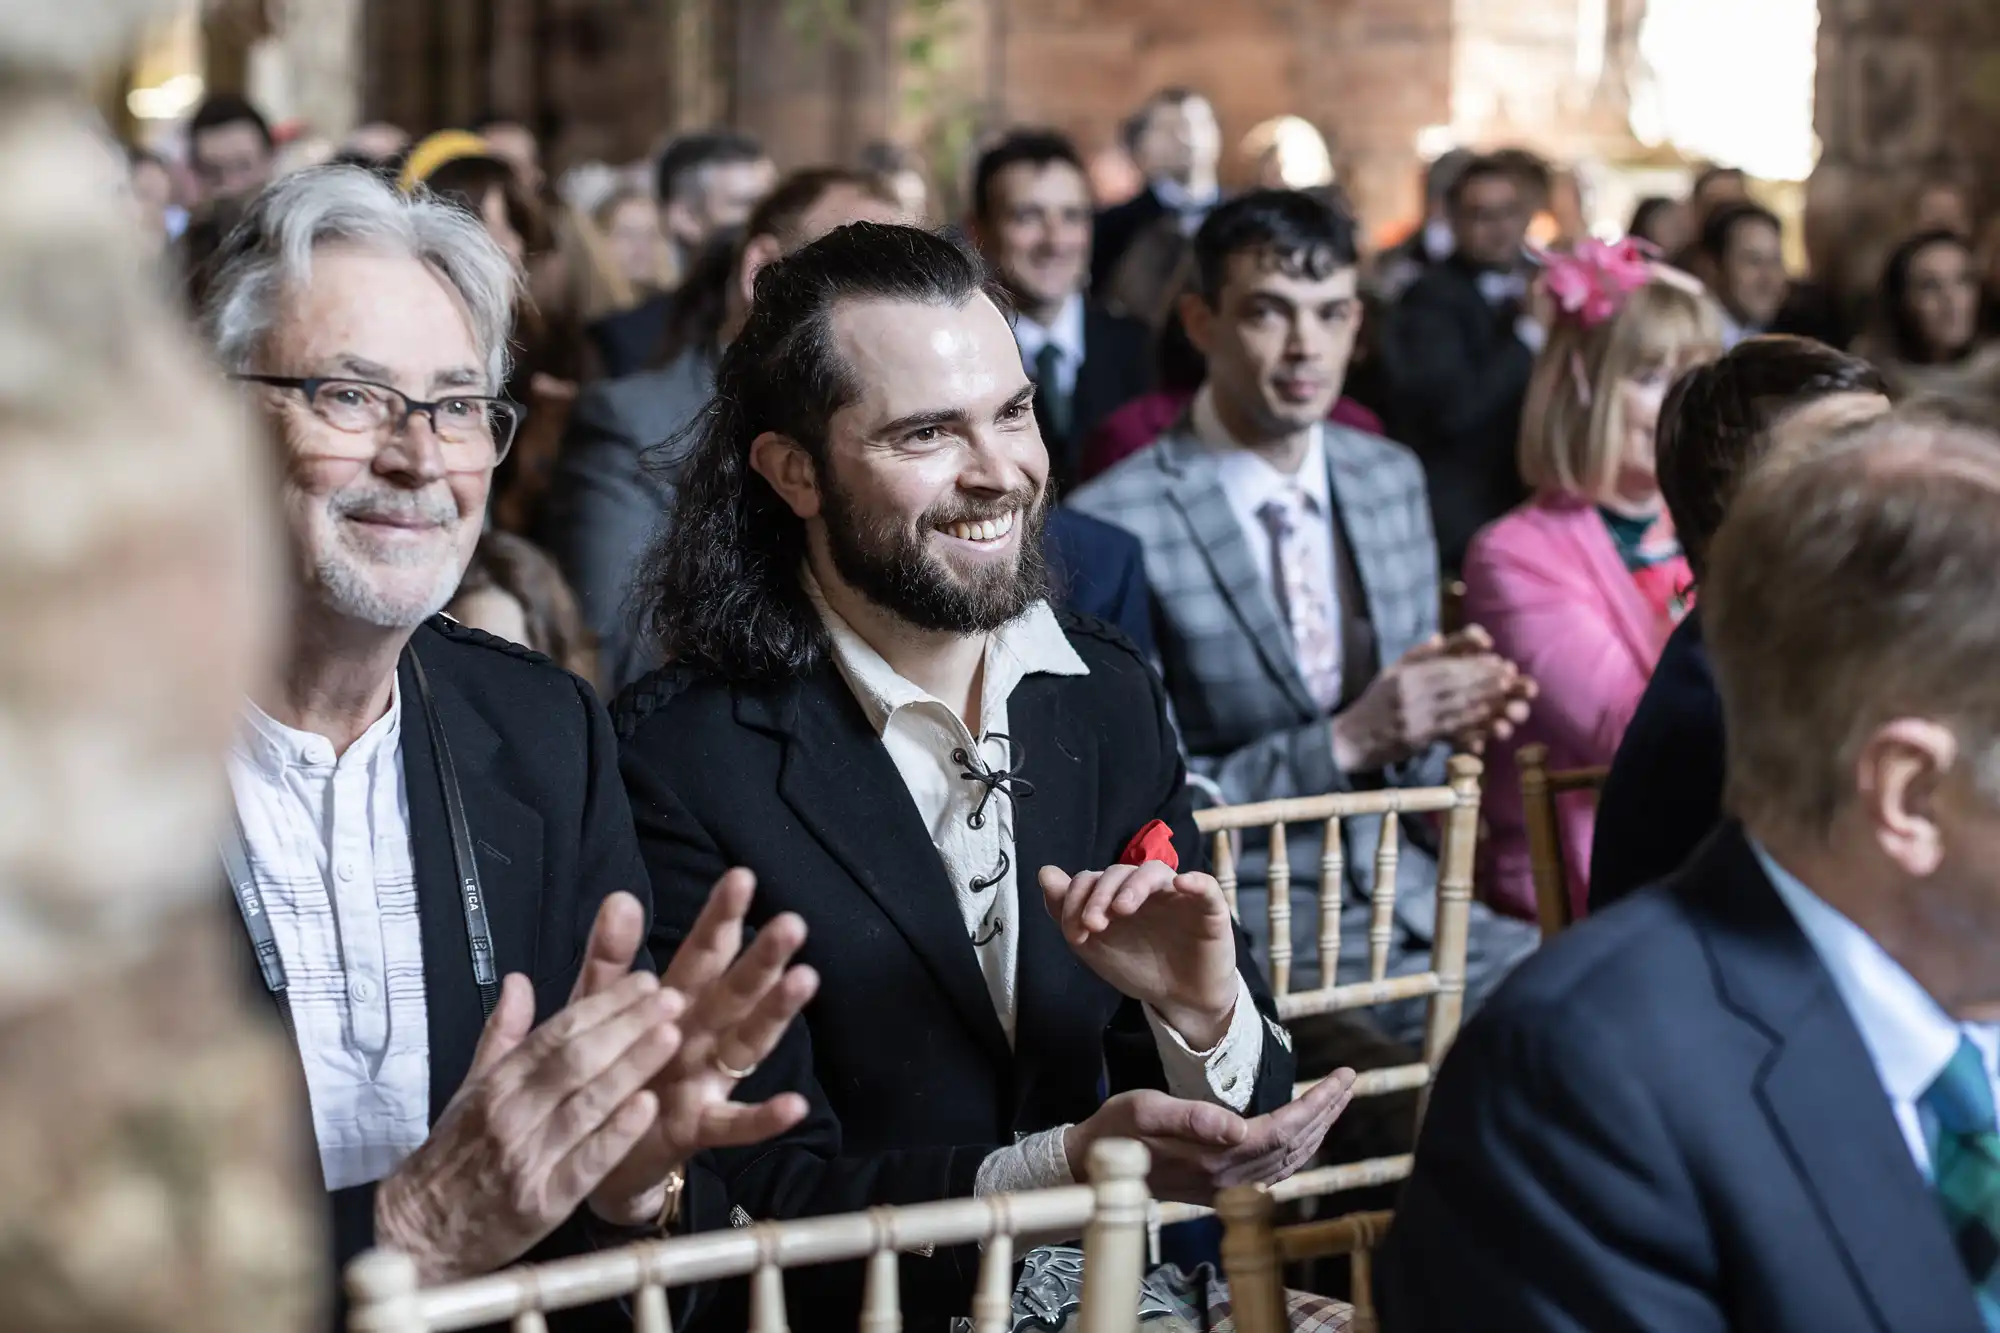 Group of people seated at an event, some clapping. The focus is on a smiling bearded man with long hair, wearing a black jacket and white shirt. The background shows other seated attendees.